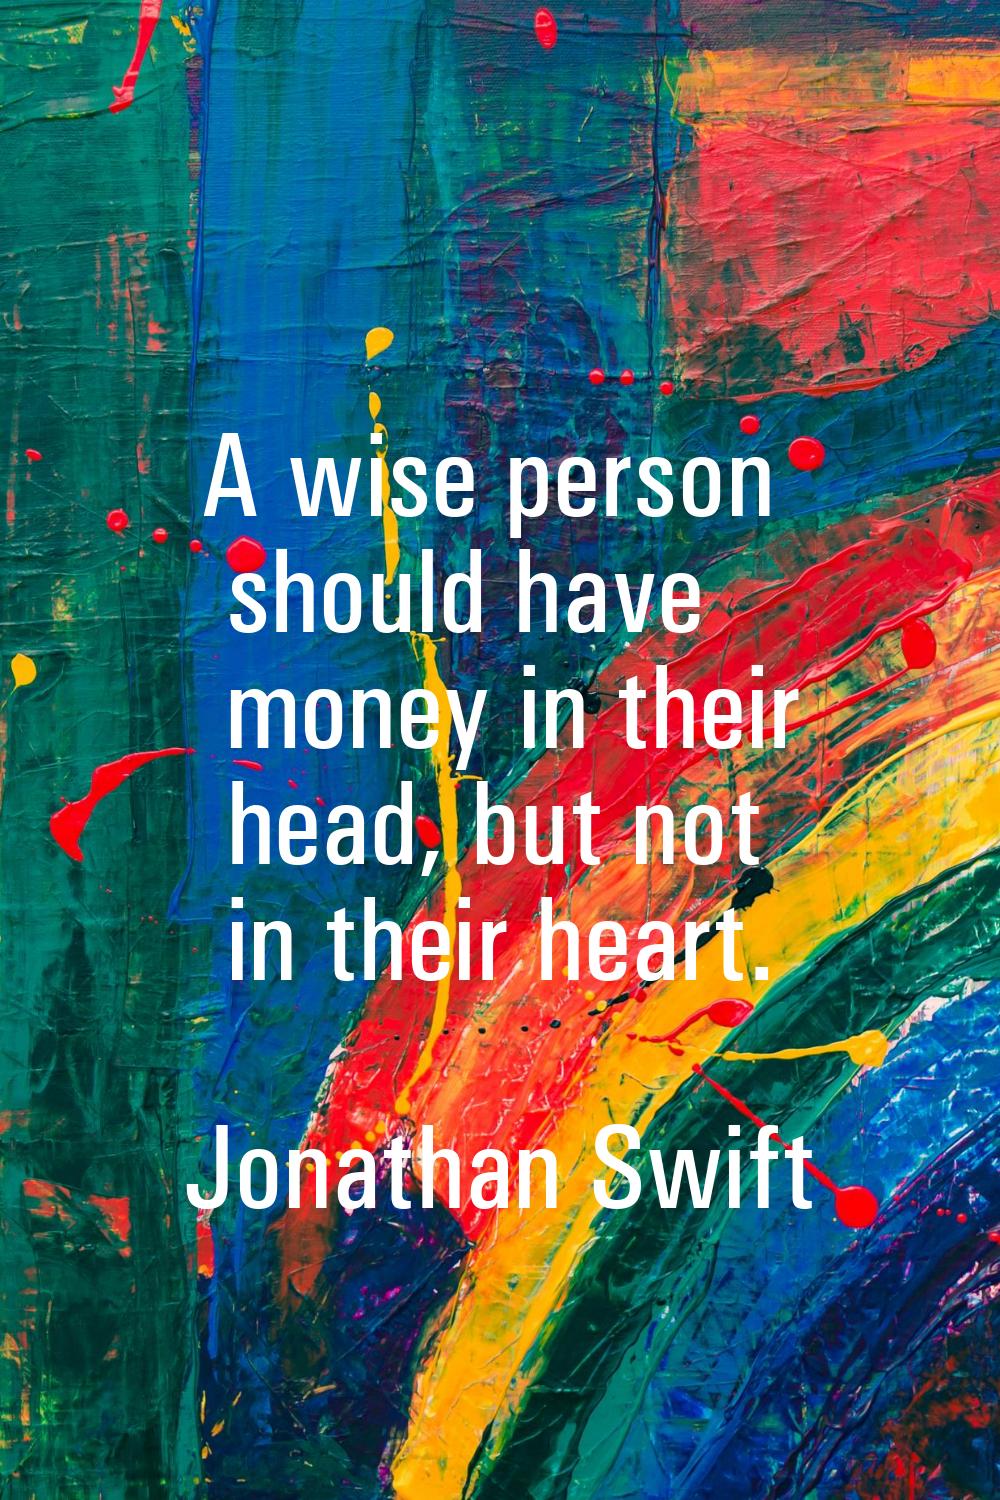 A wise person should have money in their head, but not in their heart.